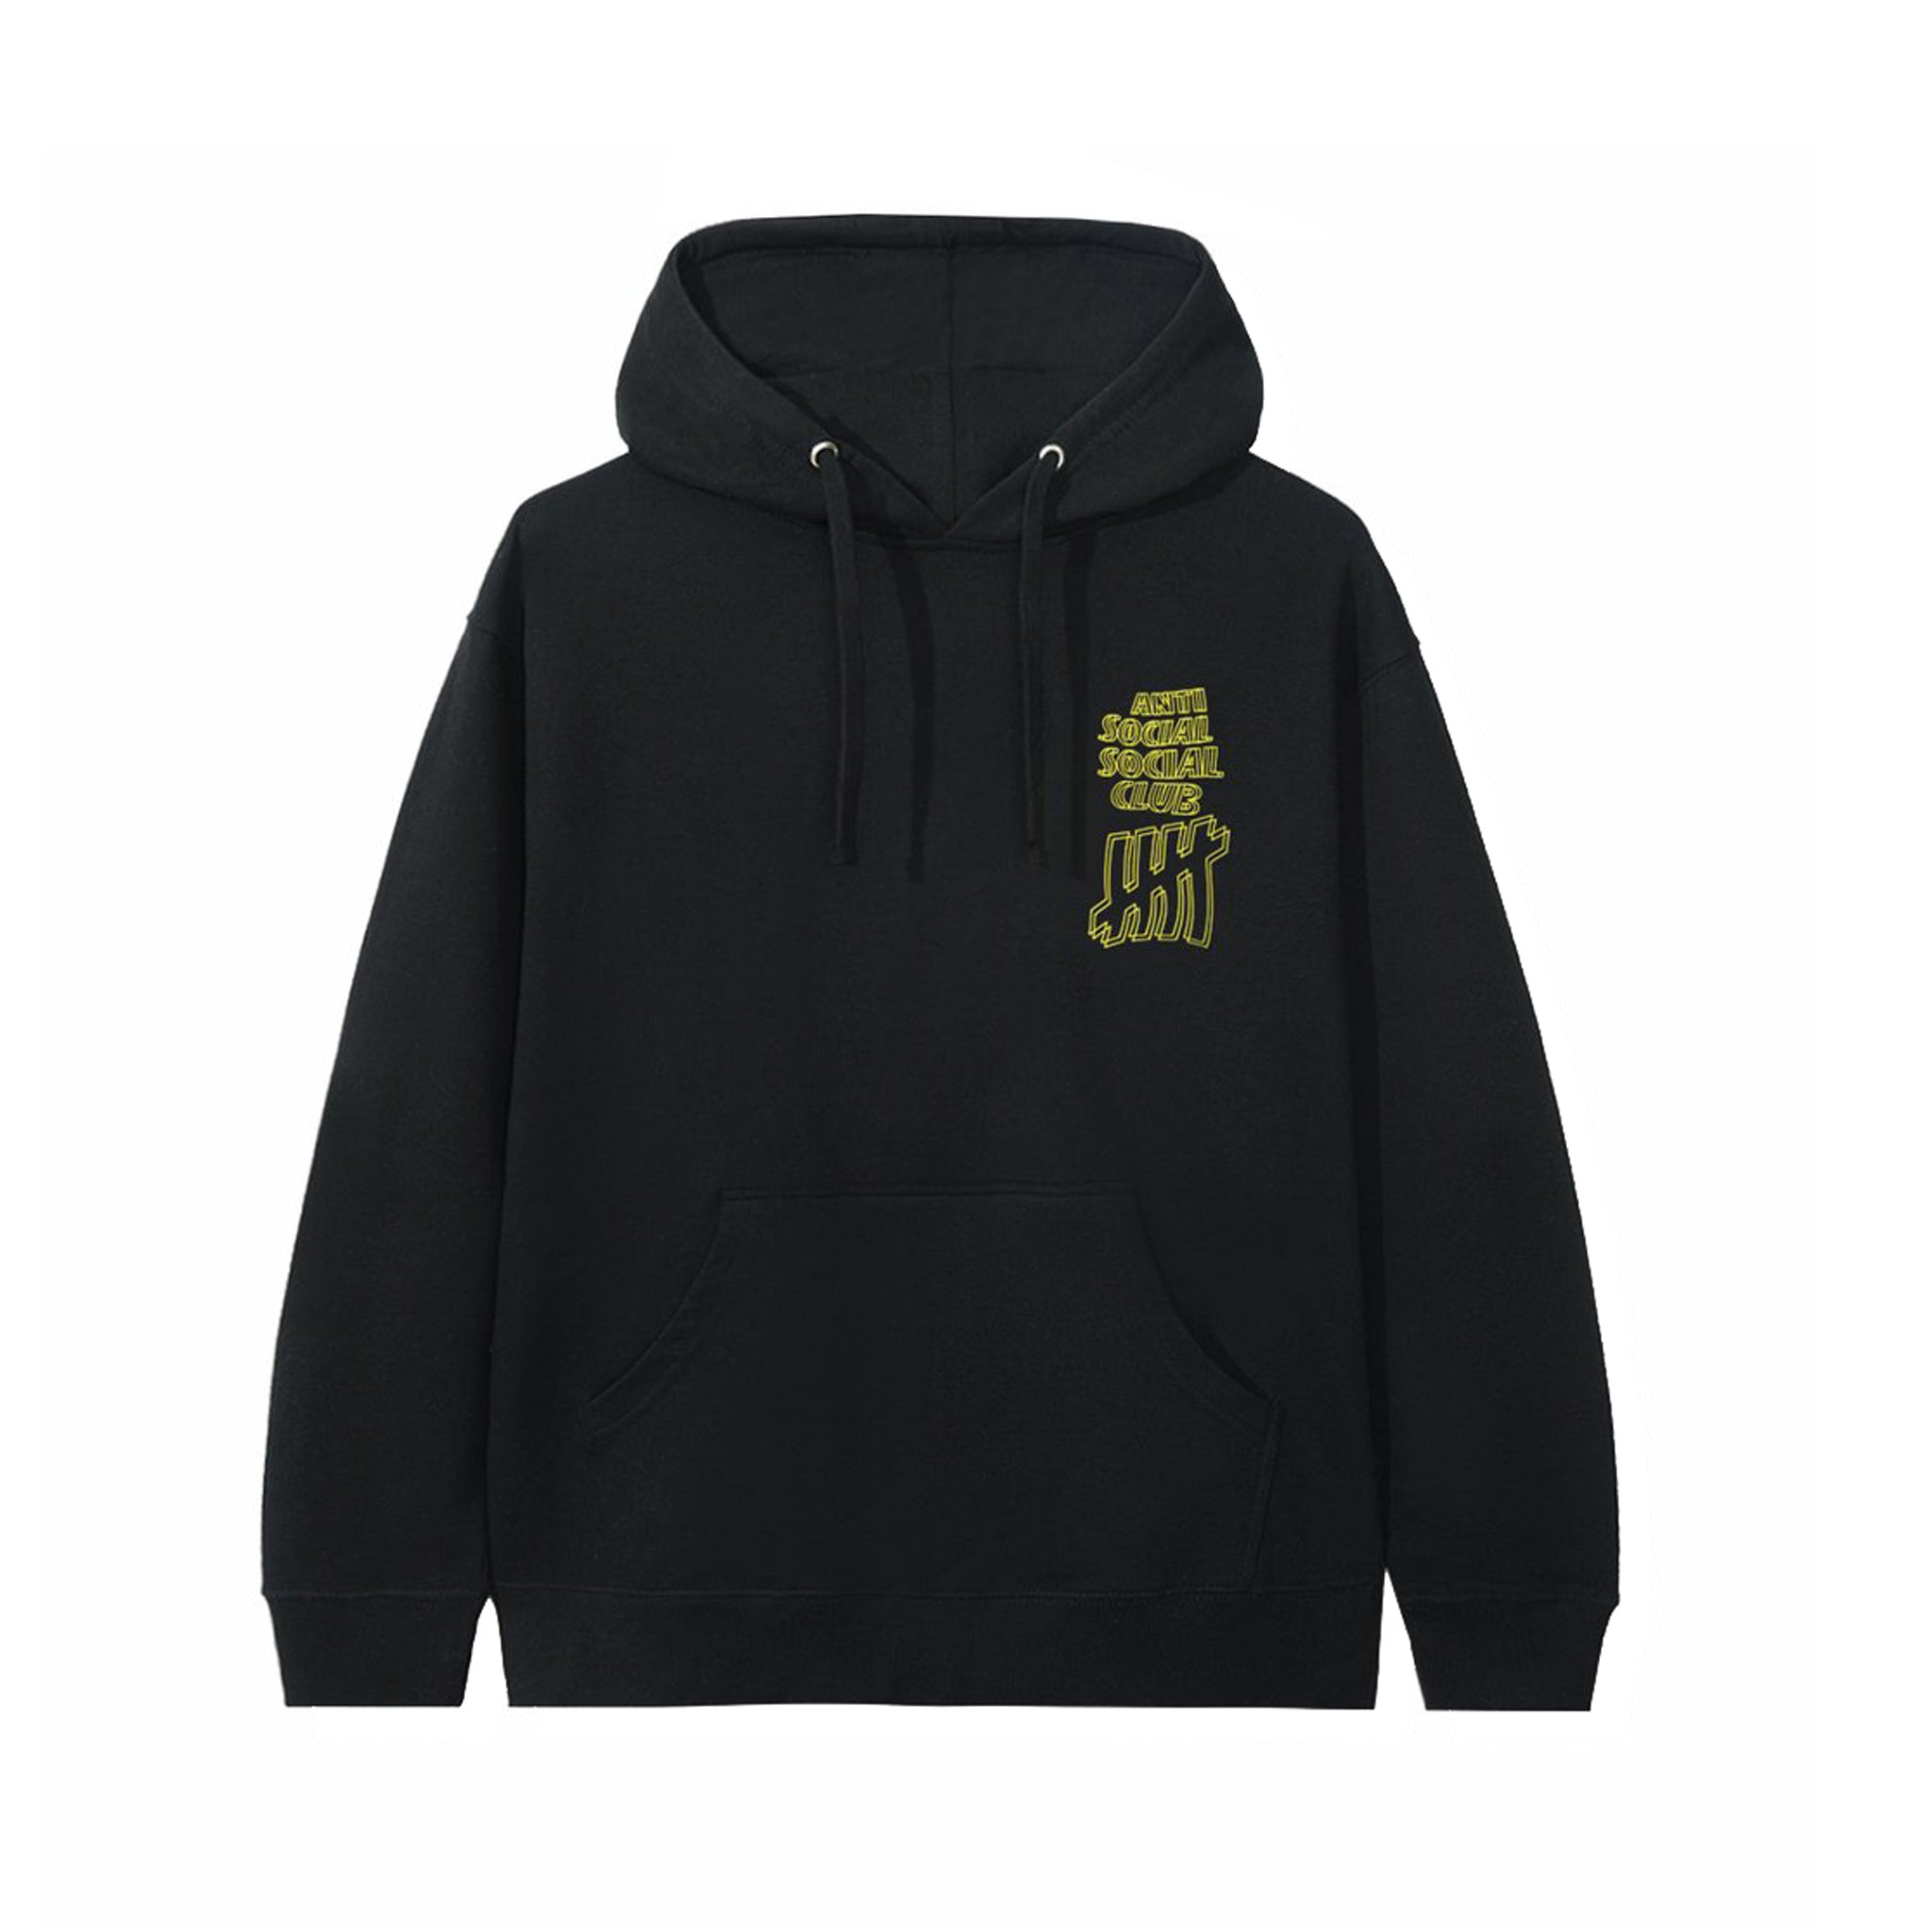 Anti Social Social Club Undefeated Hoodie - Black FRONT | Australia New Zealand